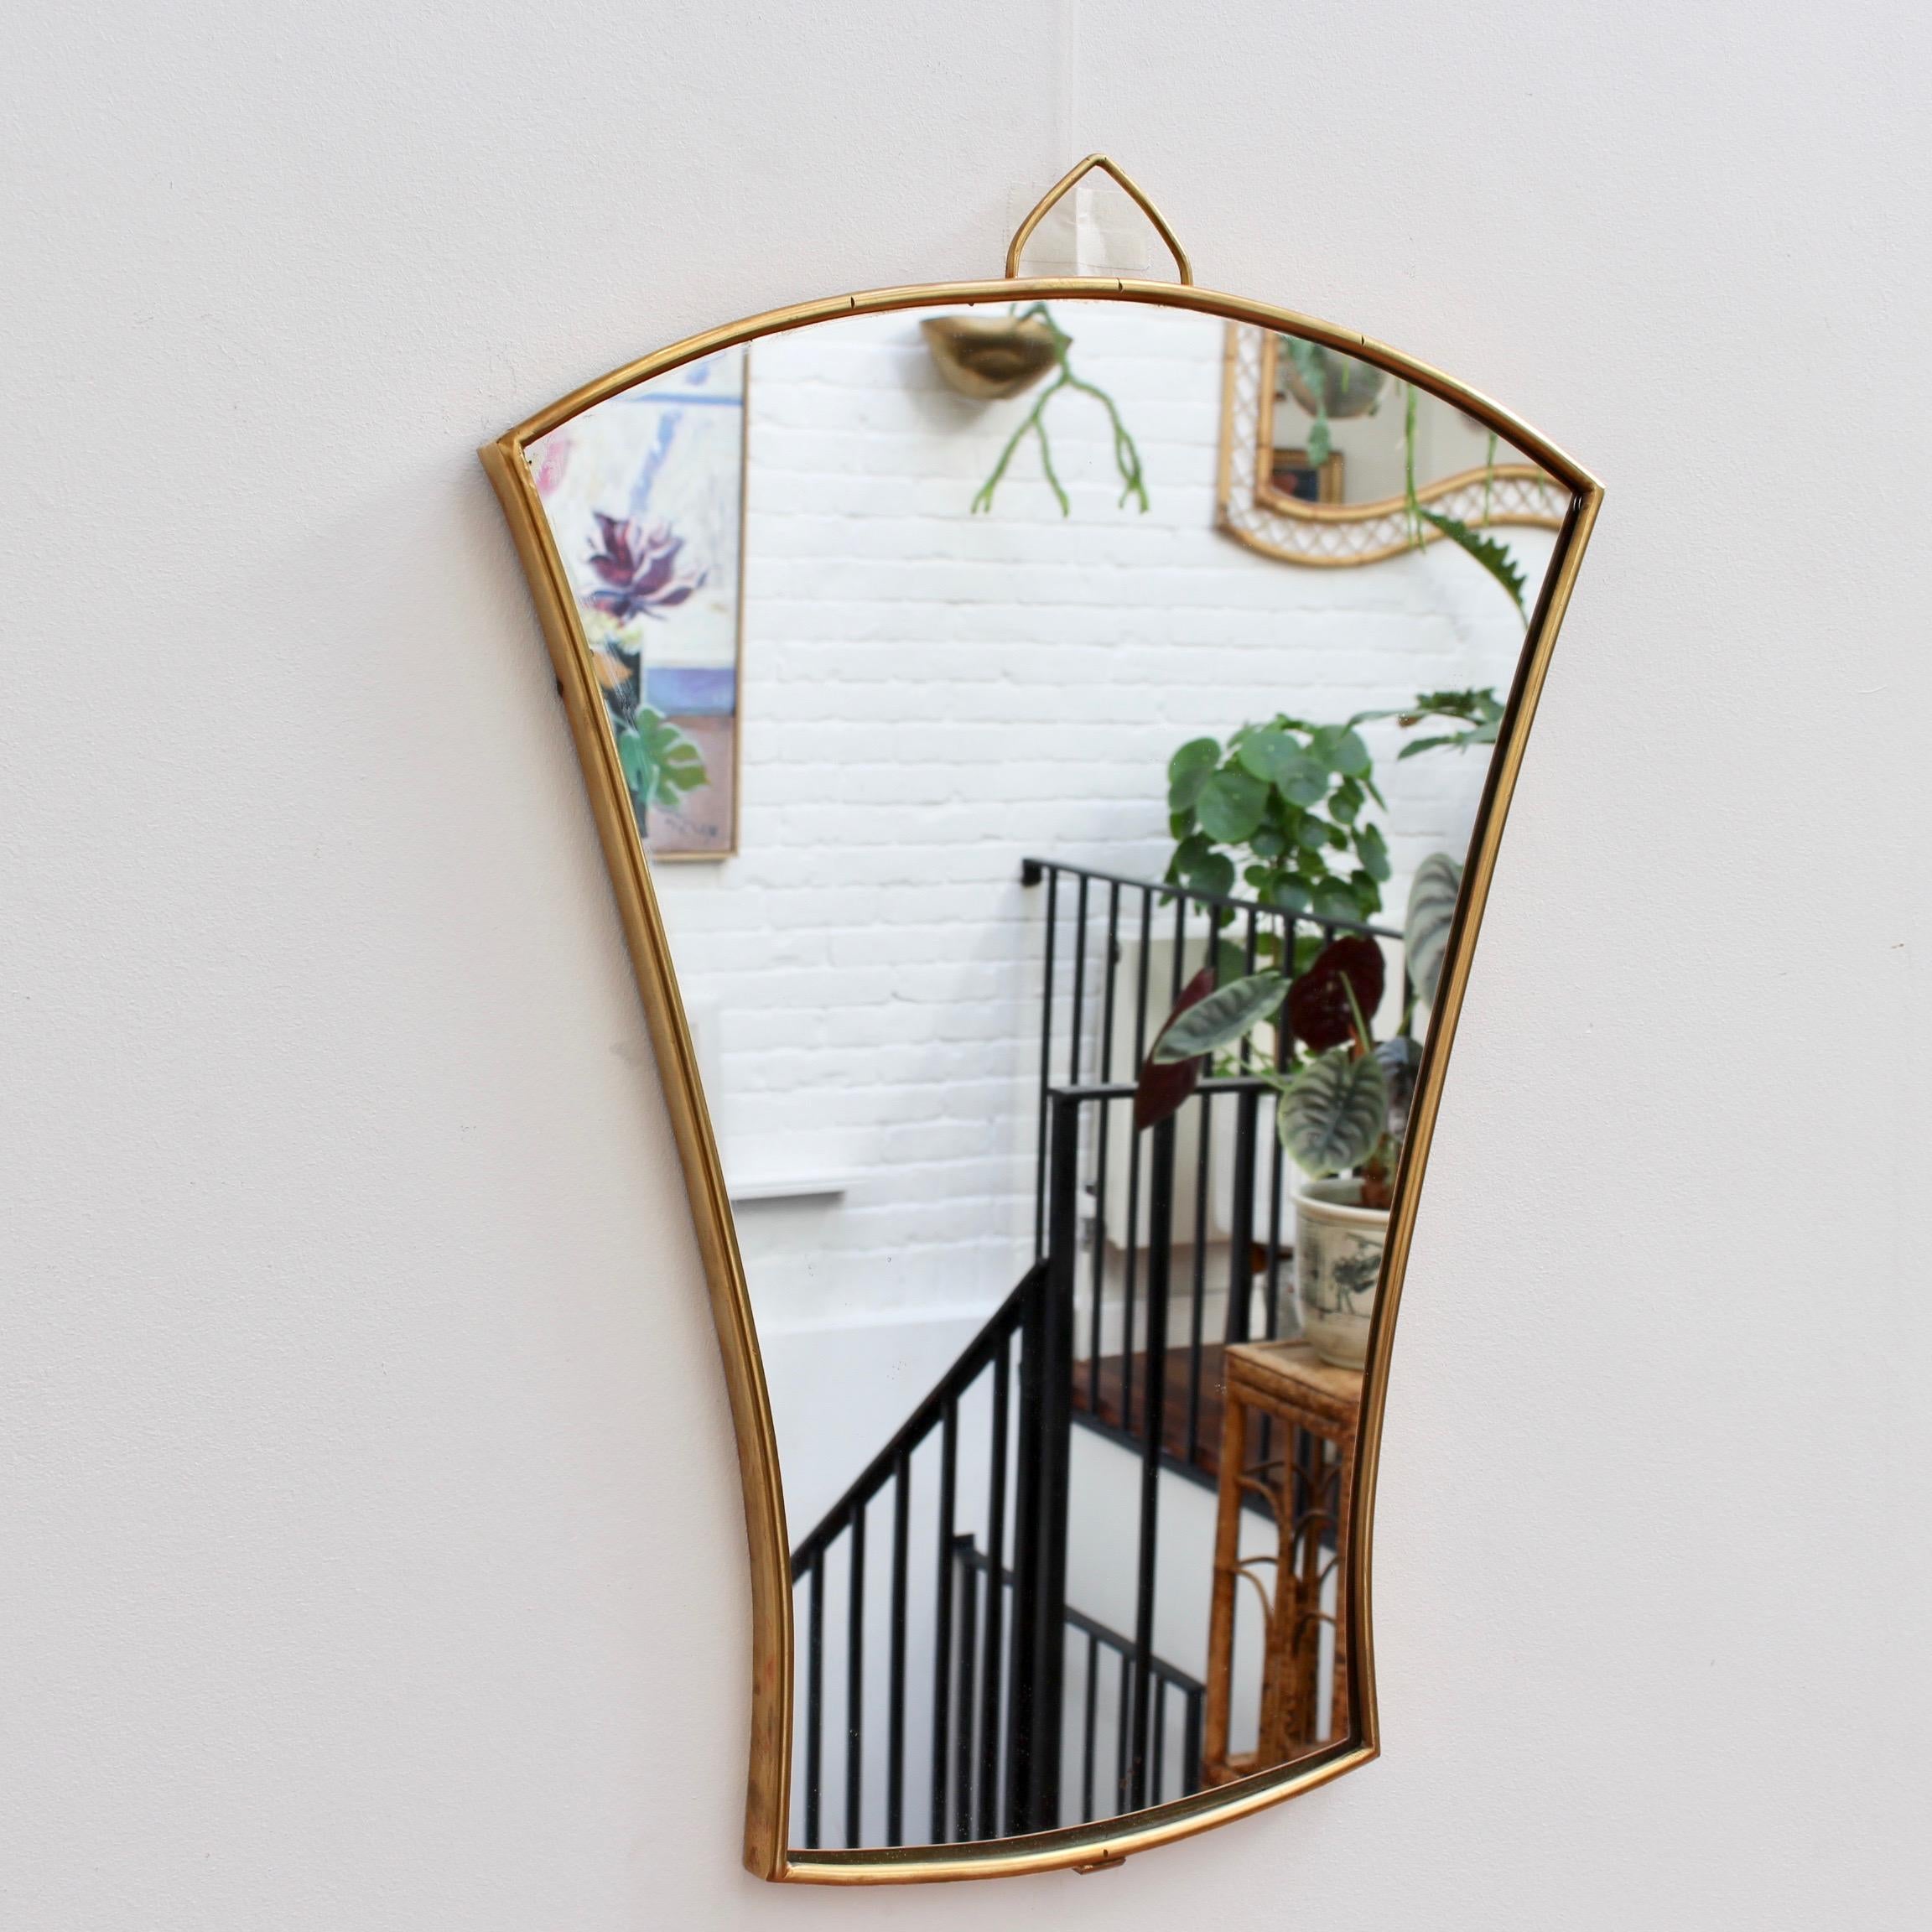 Midcentury Italian Fan-Shaped Wall Mirror with Brass Frame, circa 1950s, Small 5